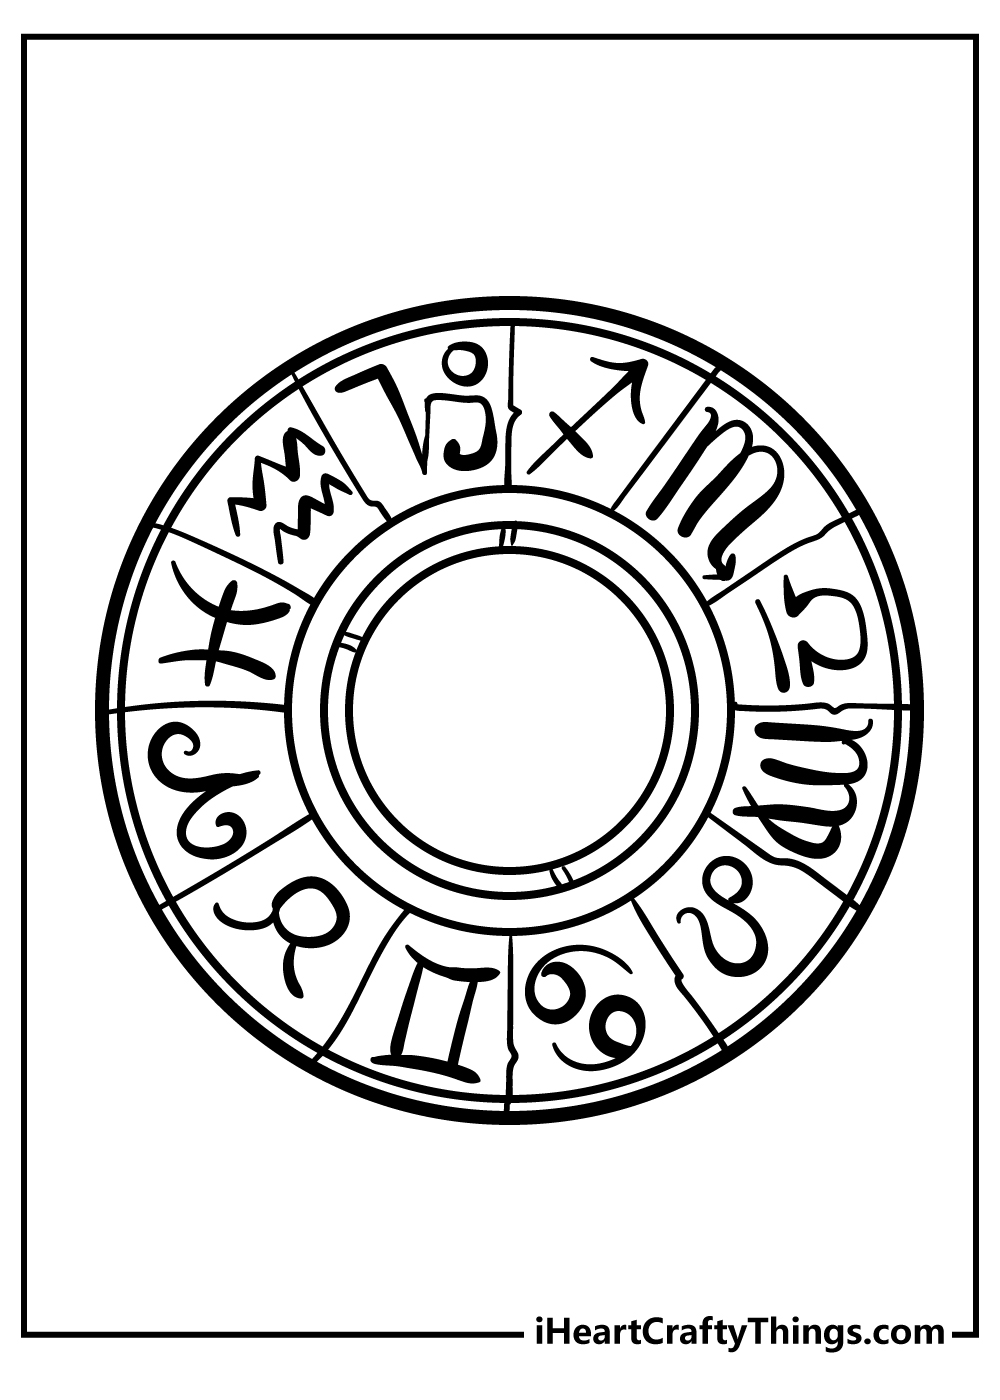 Zodiac Sign Coloring Pages for kids free download